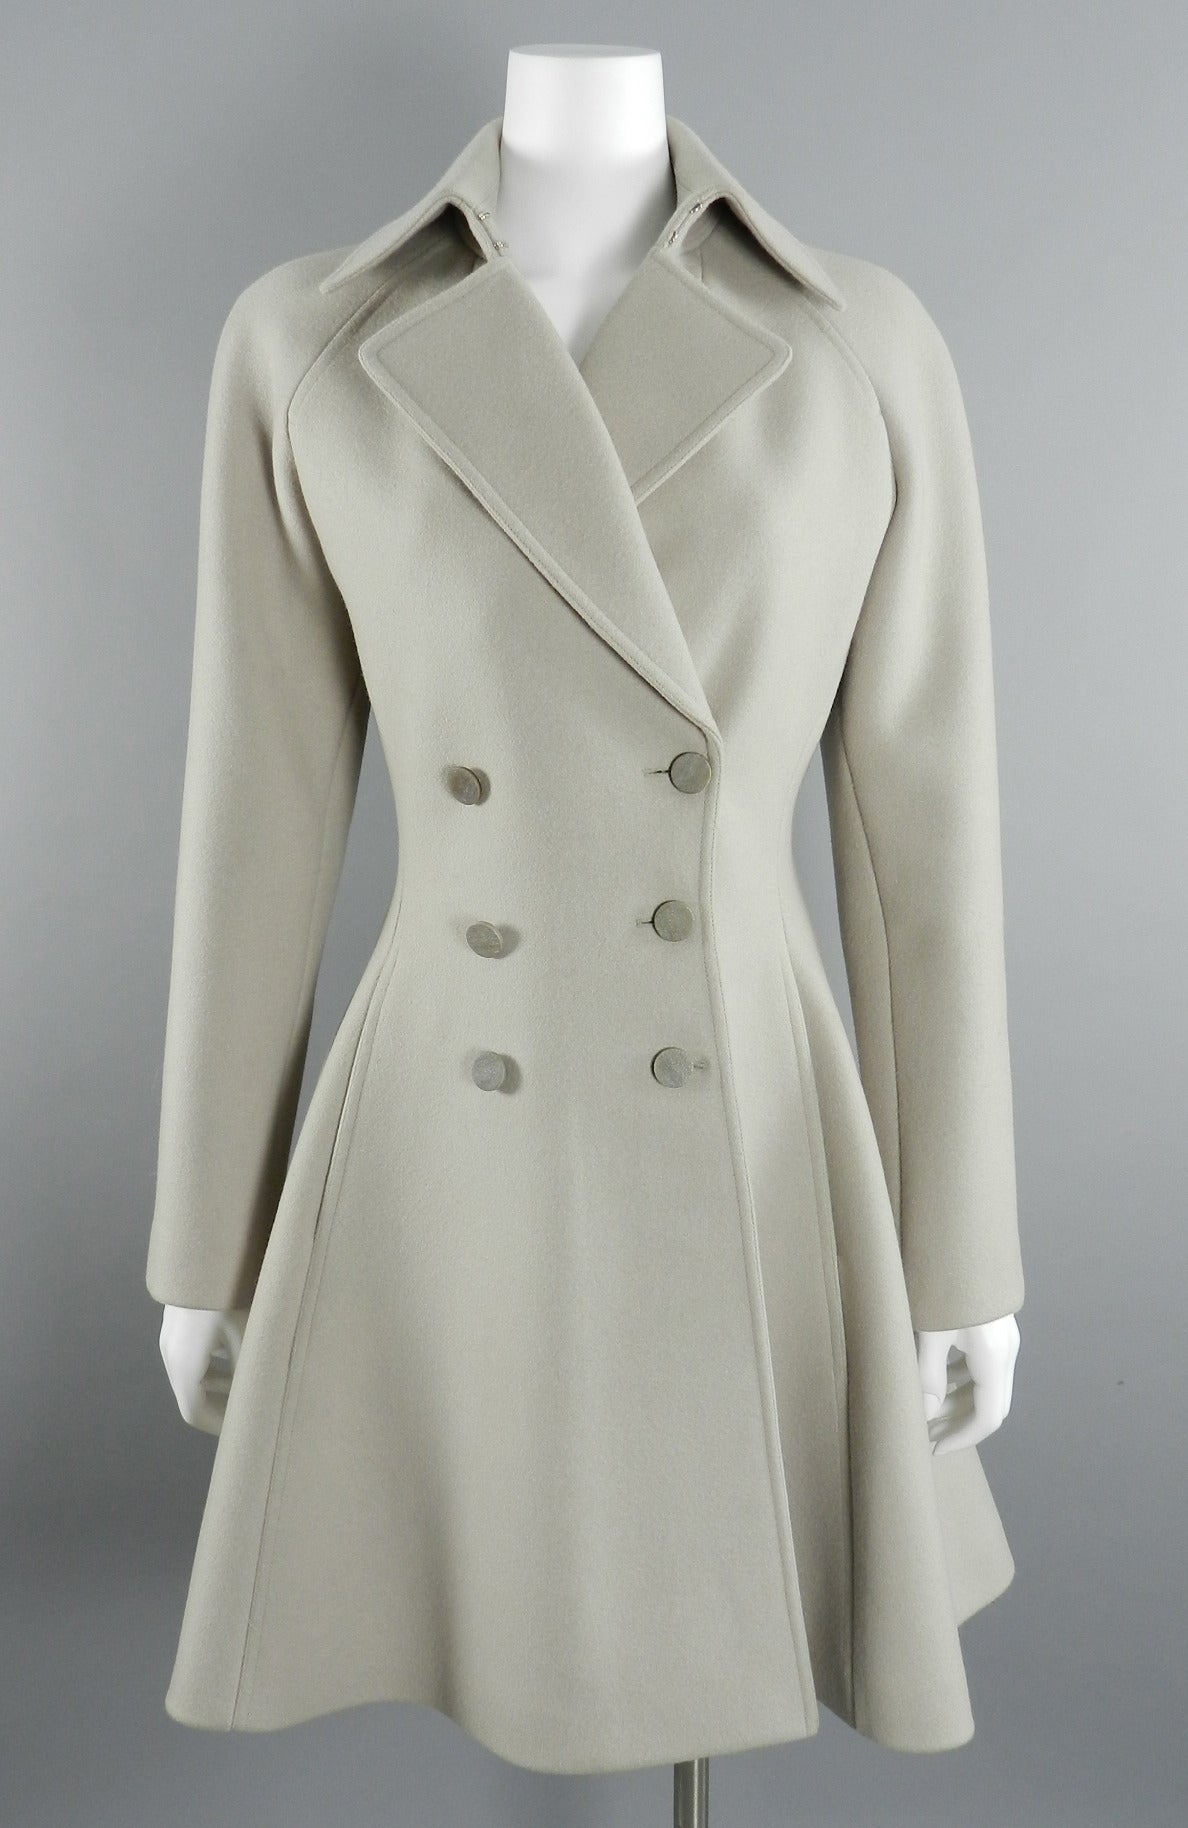 Alaia Dove Grey Structured Wool Dress Coat 3